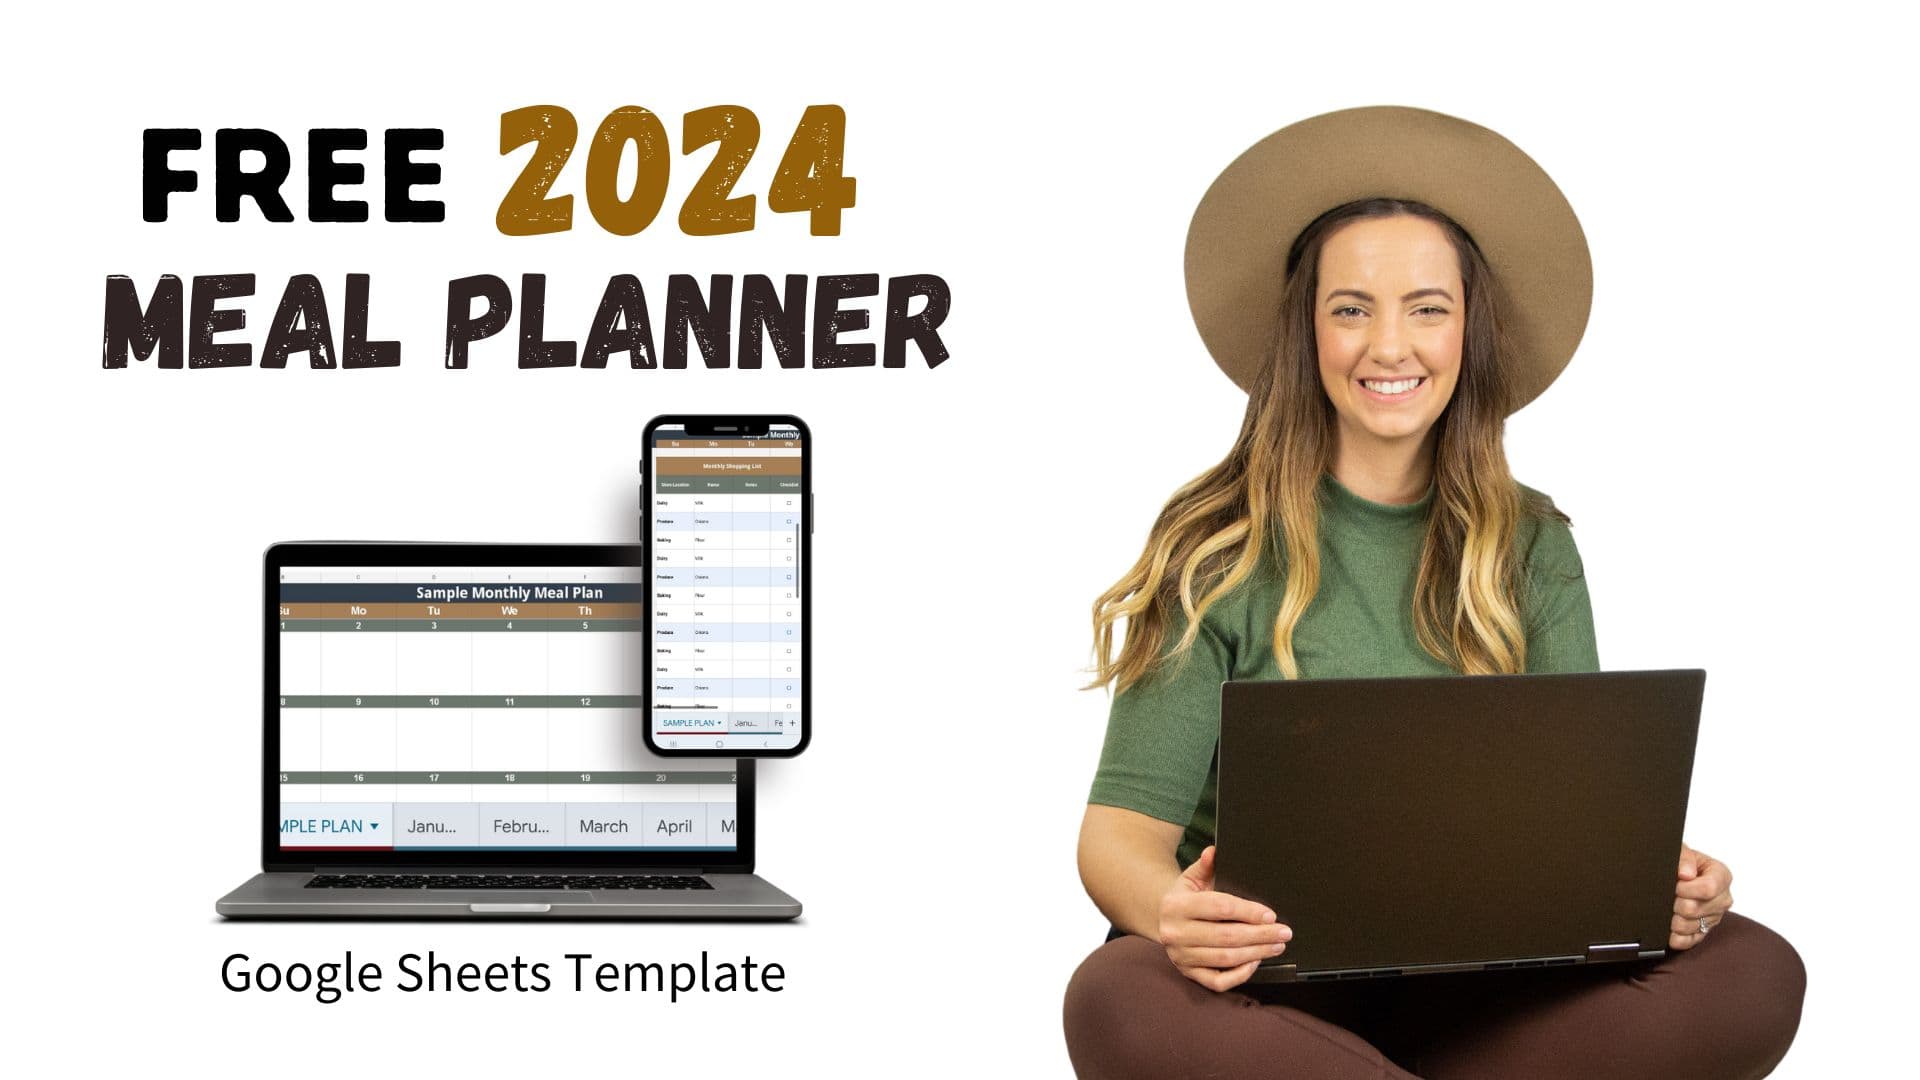 girl holding laptop with text "free 2024 meal planner"